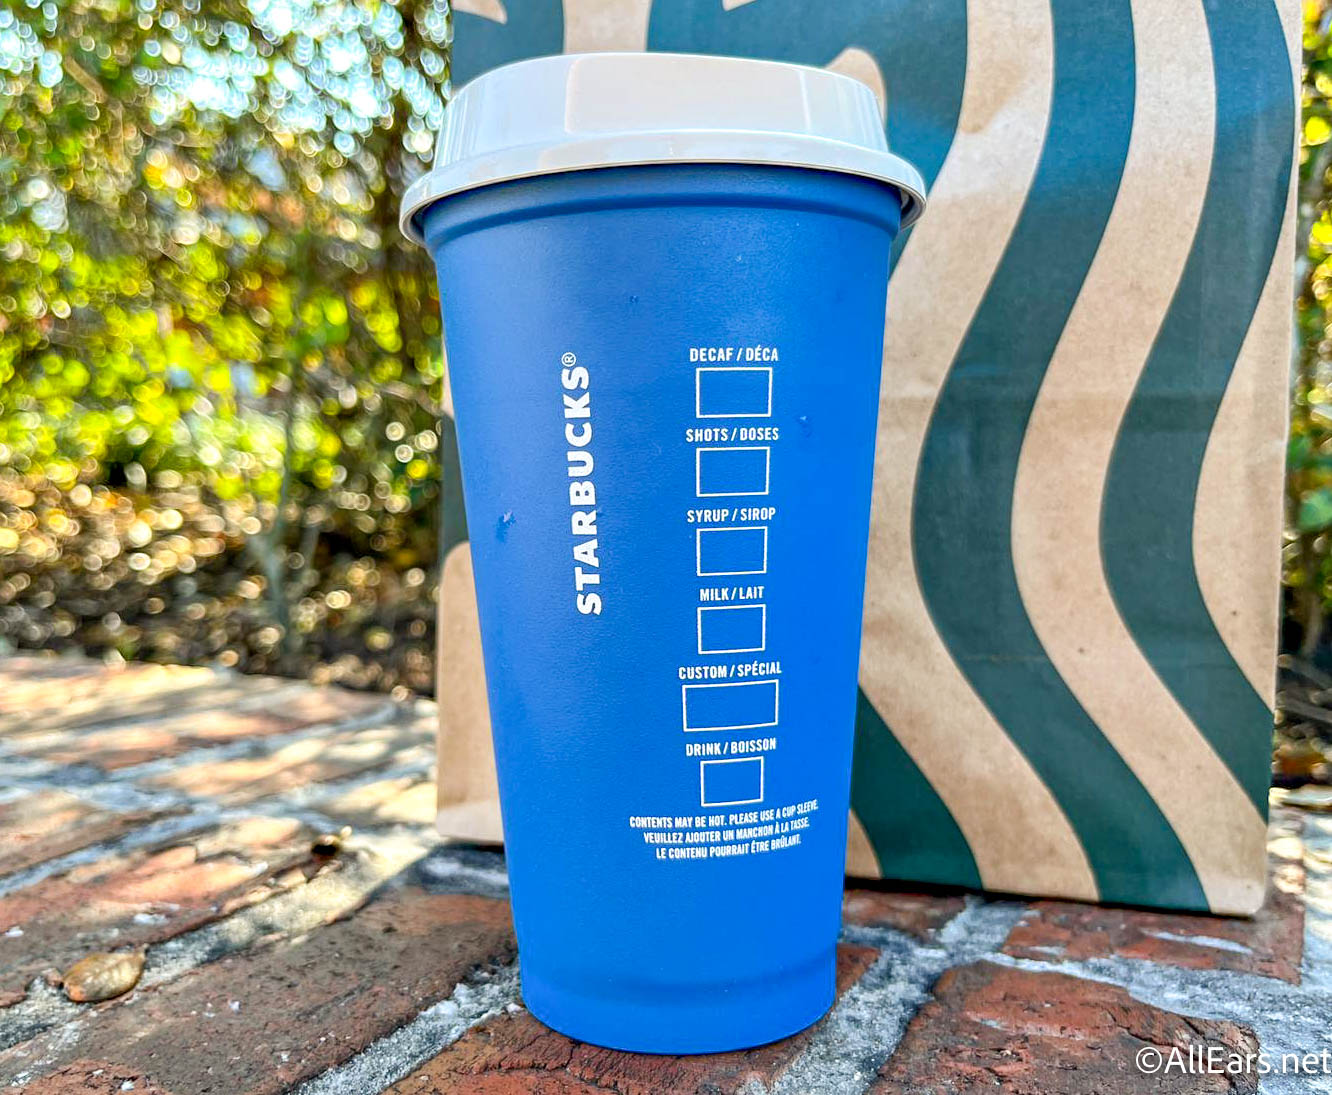  Starbucks Reusable Color Changing 6 Hot Cups - Limited